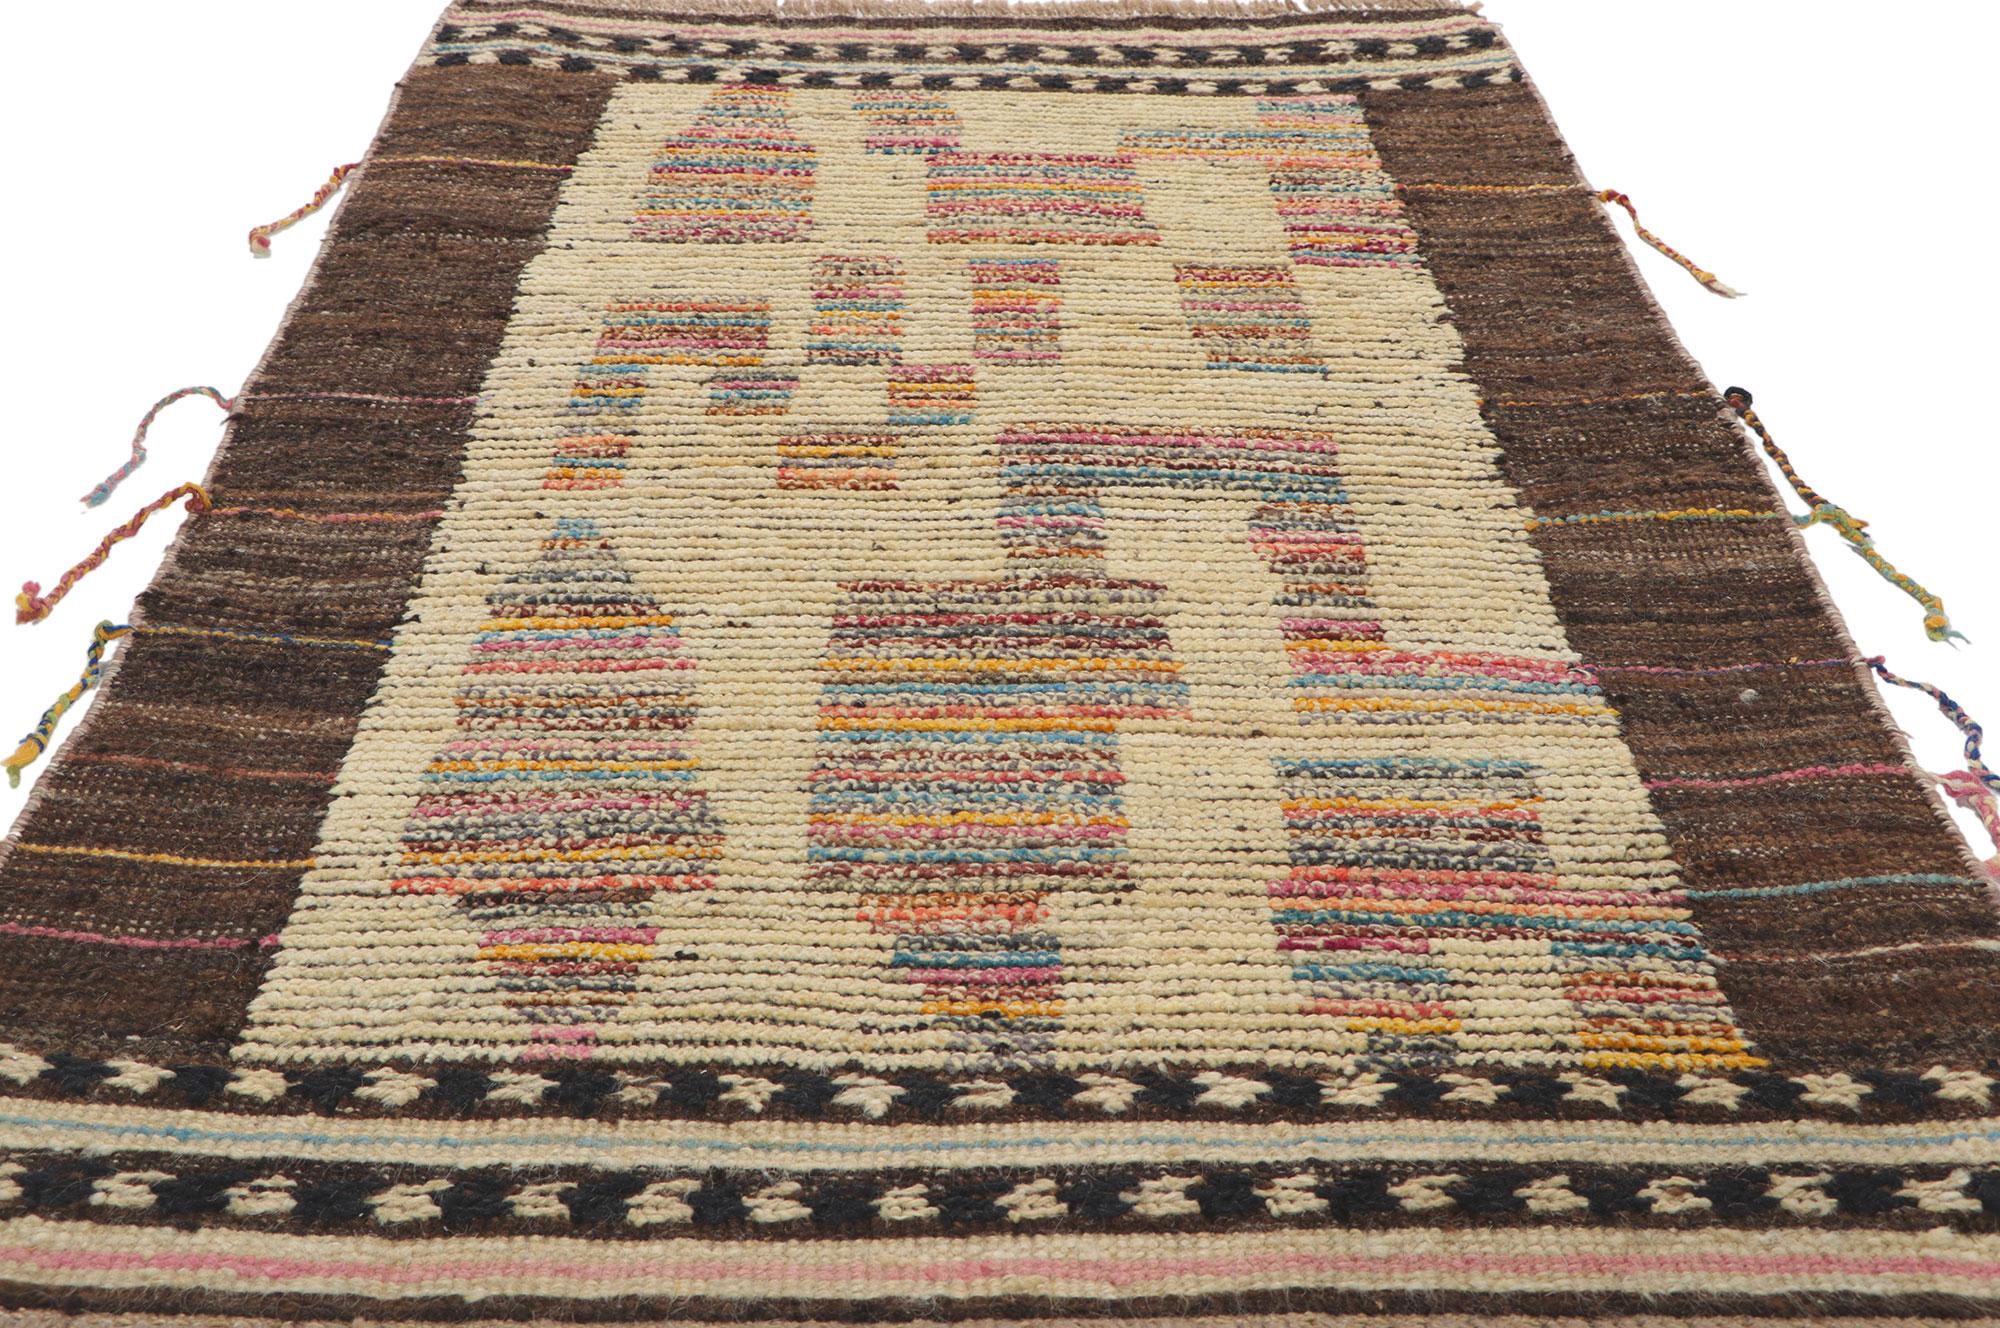 Pakistani New Color Block Moroccan Style Rug with Short Pile For Sale